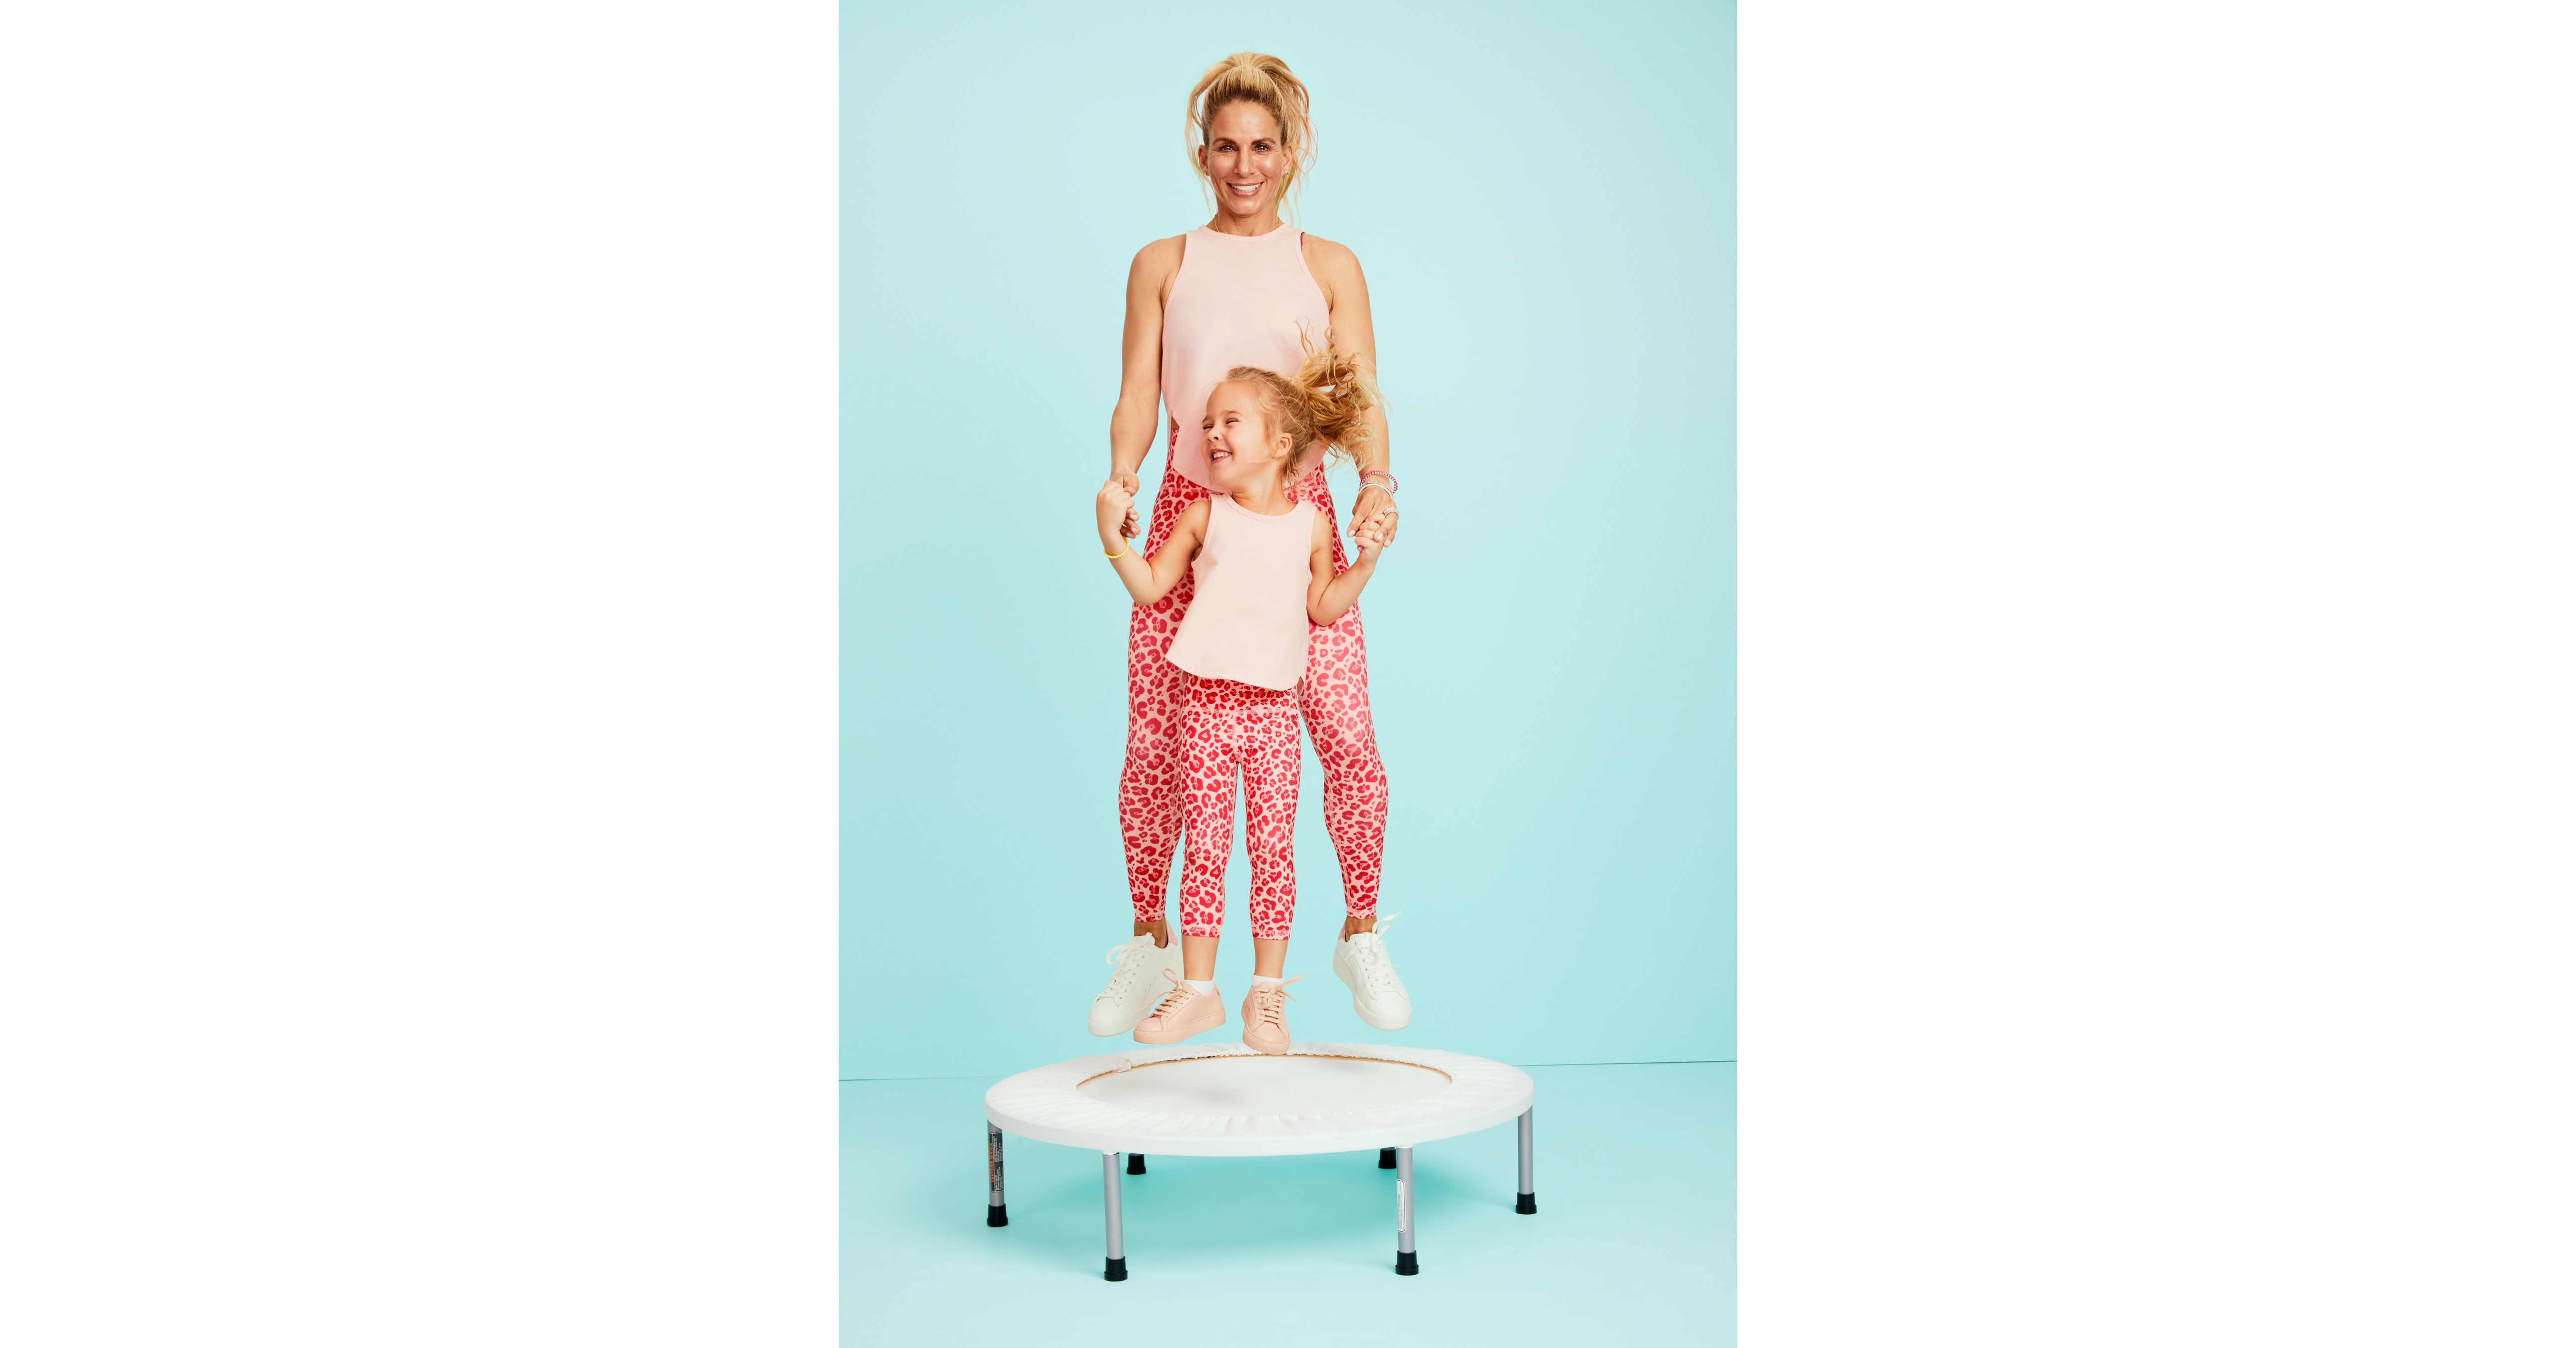 Fabletics just dropped an adorable 'Mom and Me' capsule collection